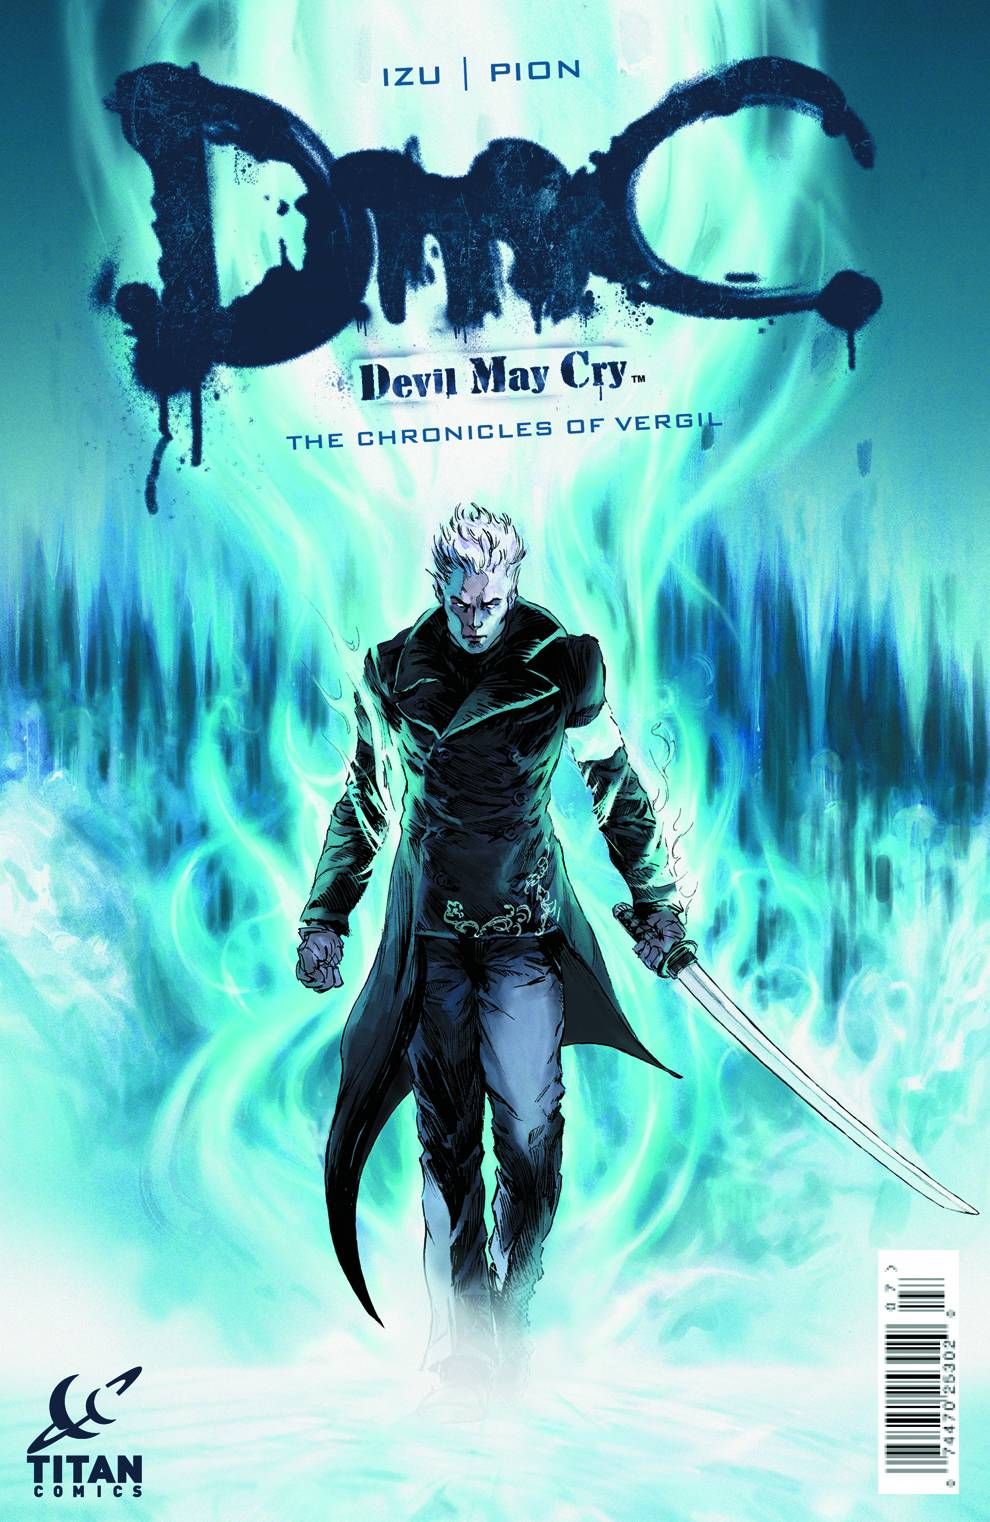 DmC: Devil May Cry - The Chronicles of Vergil Comic